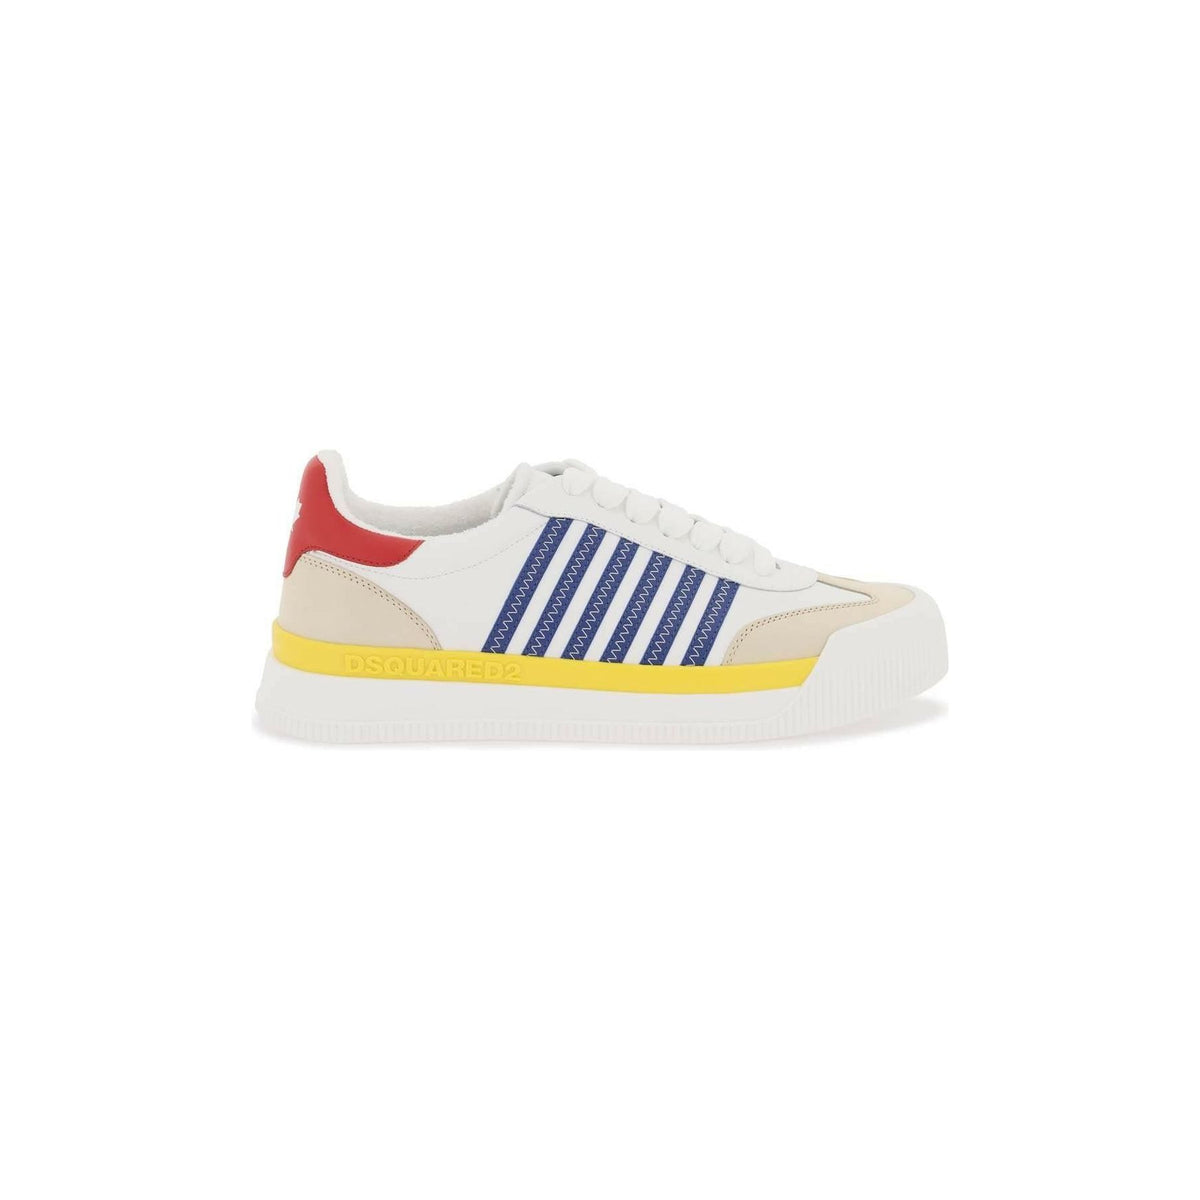 DSQUARED2 - White Yellow Blue New Jersey Leather Sneakers With Canadian Leaf Detail - JOHN JULIA